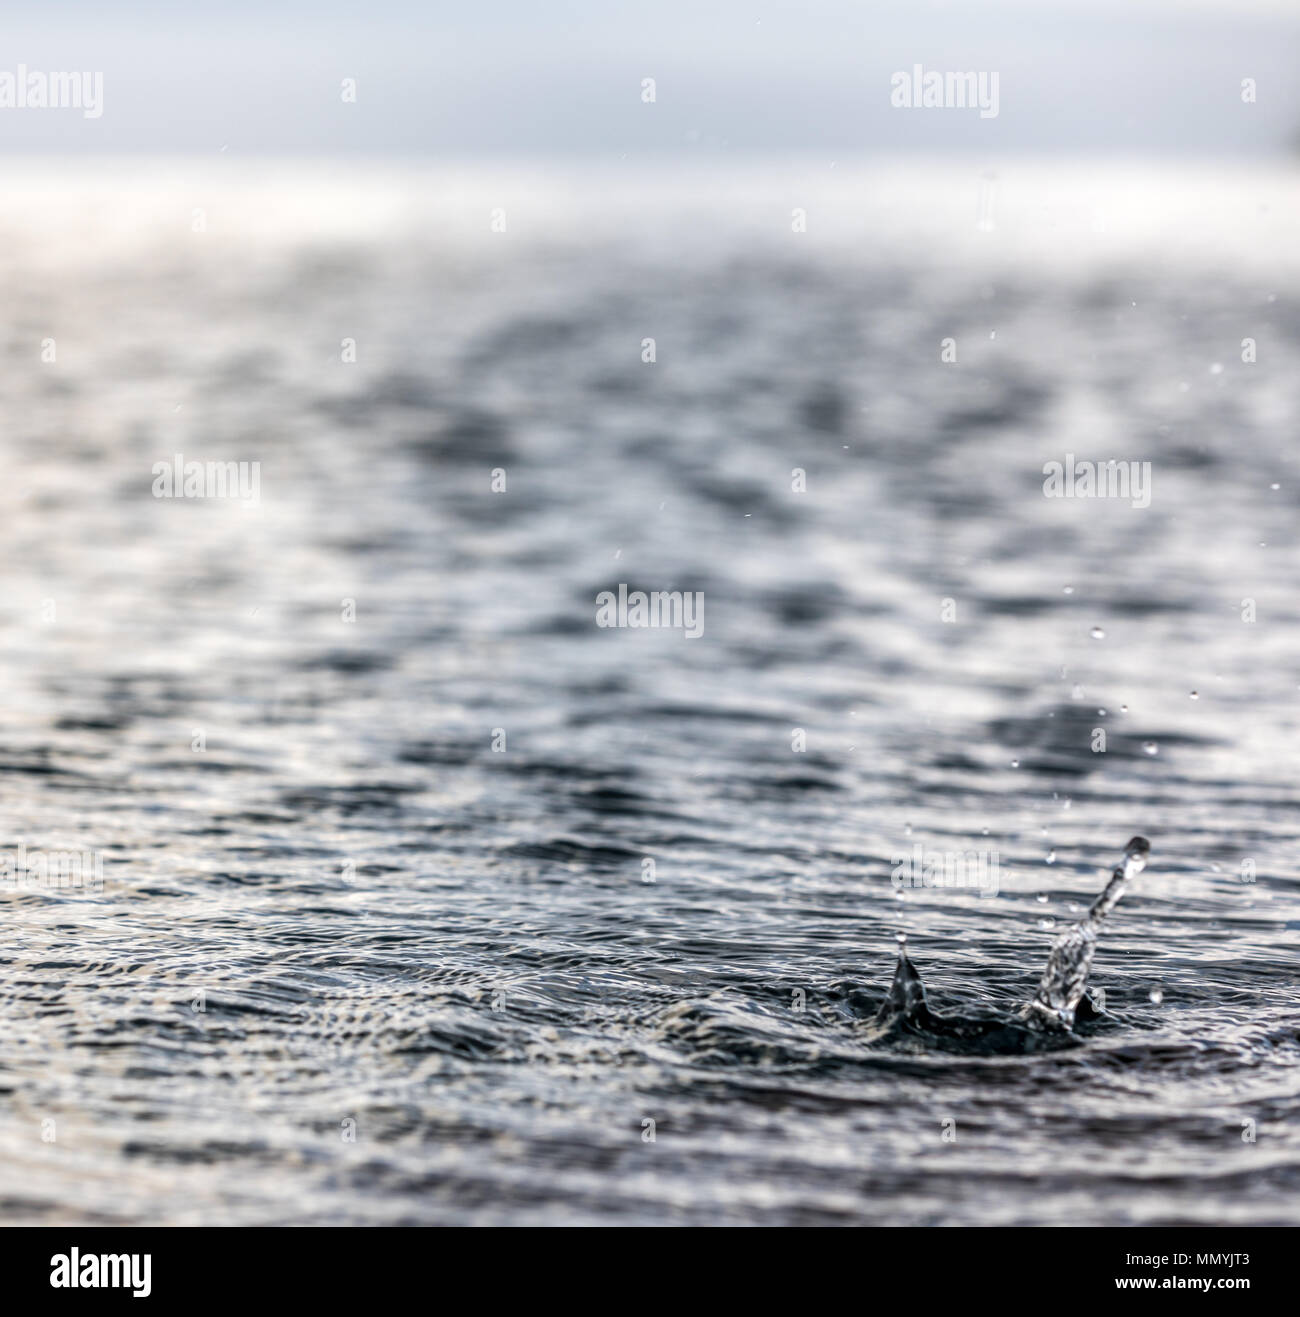 rain drops landing on a pool in st barts Stock Photo